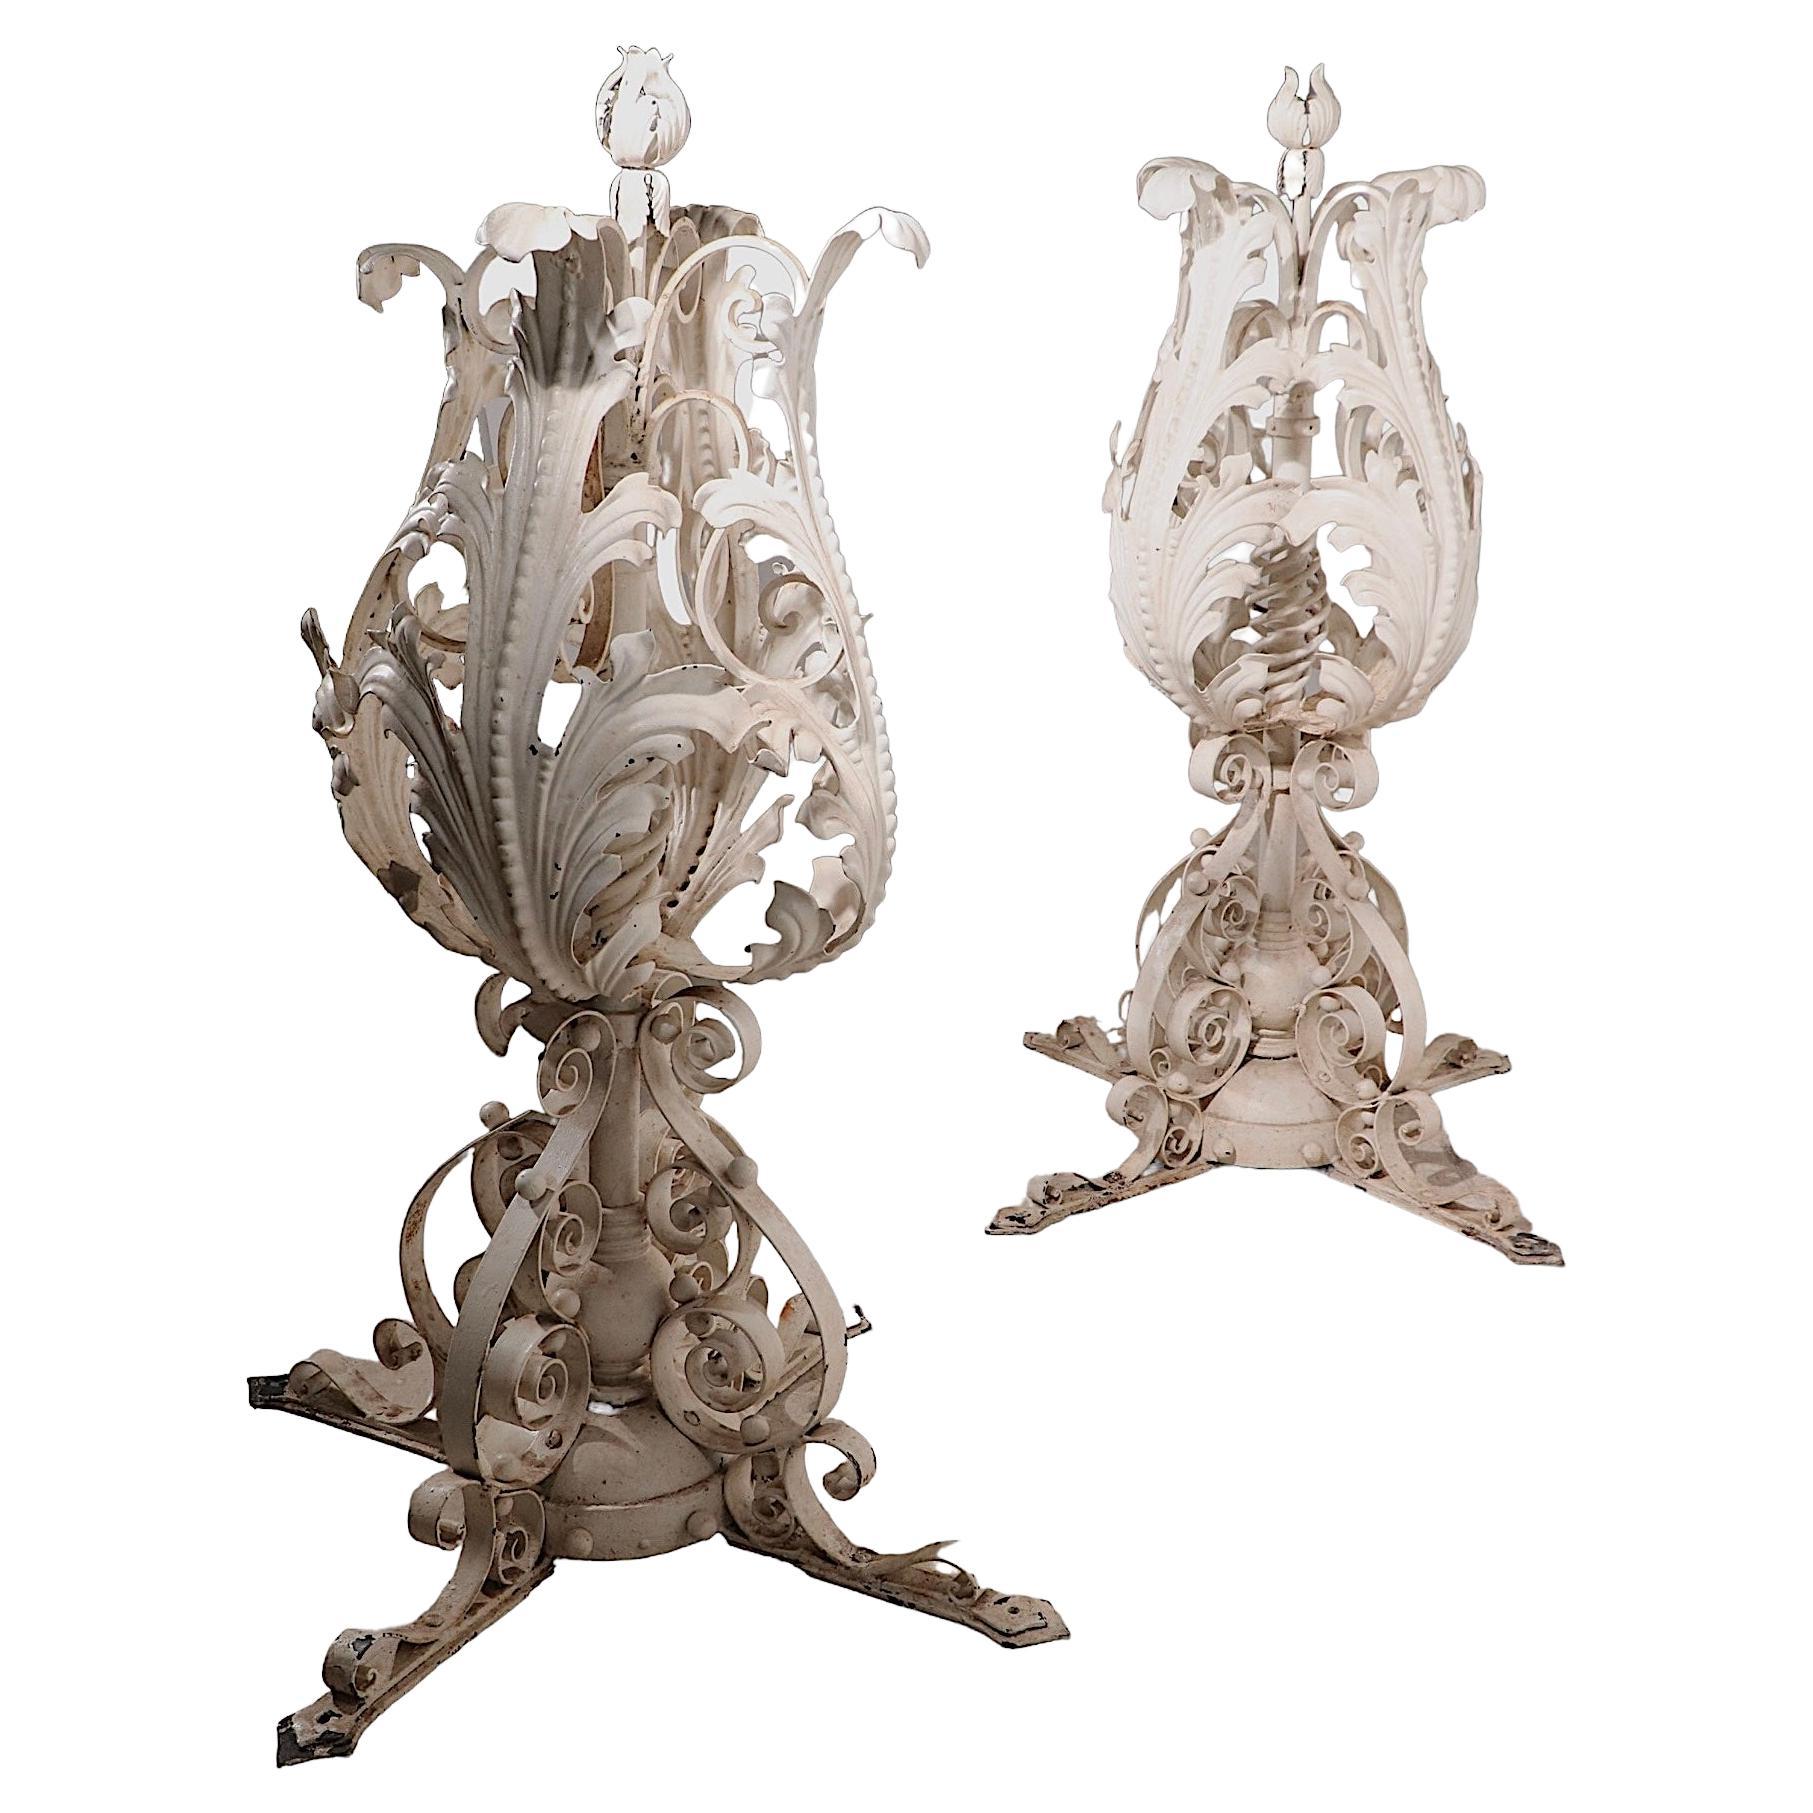  Large Pr. Wrought Iron Finials English  19th C. For Sale